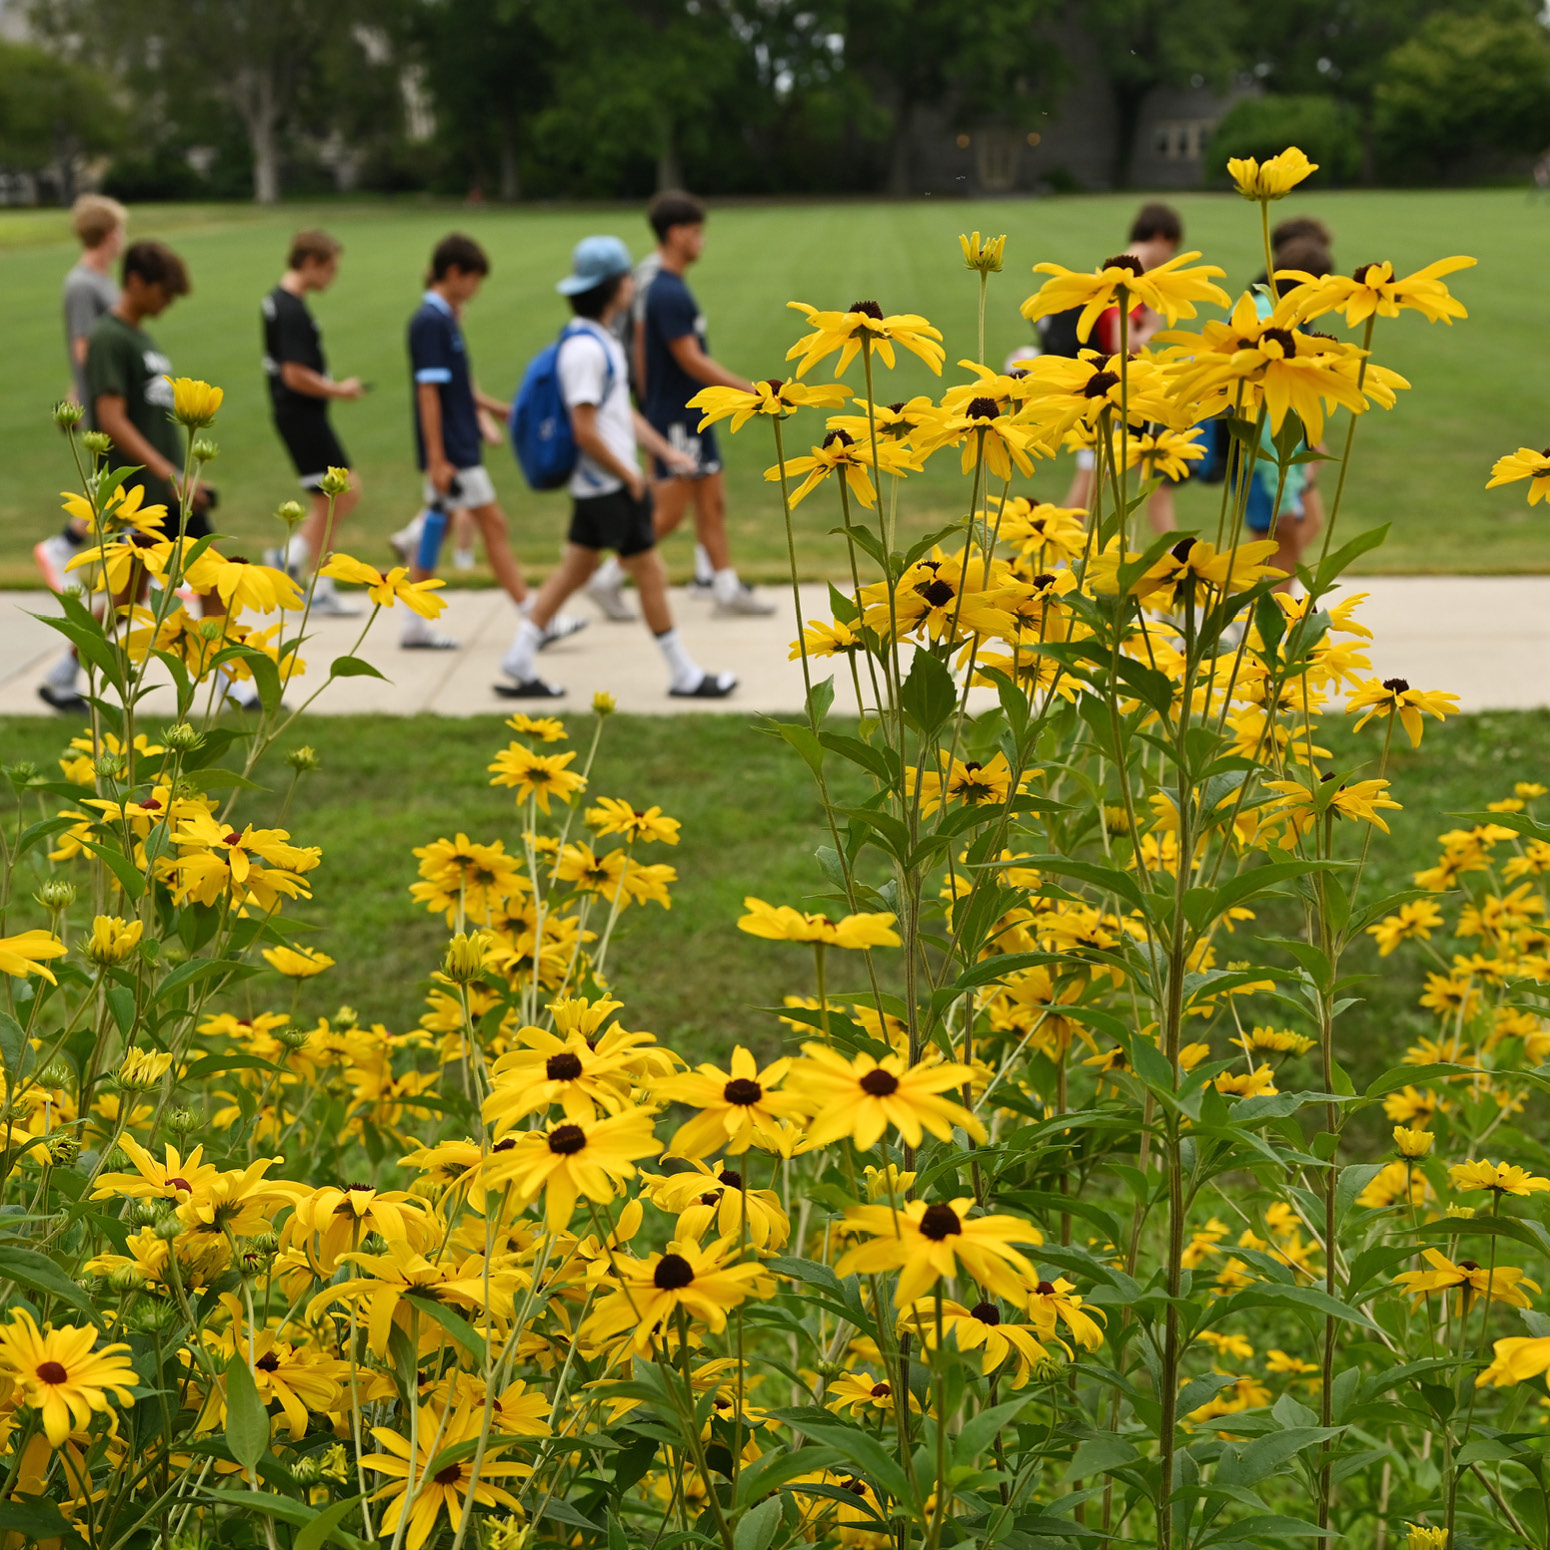 Flowers frame the foreground as students walk across campus.